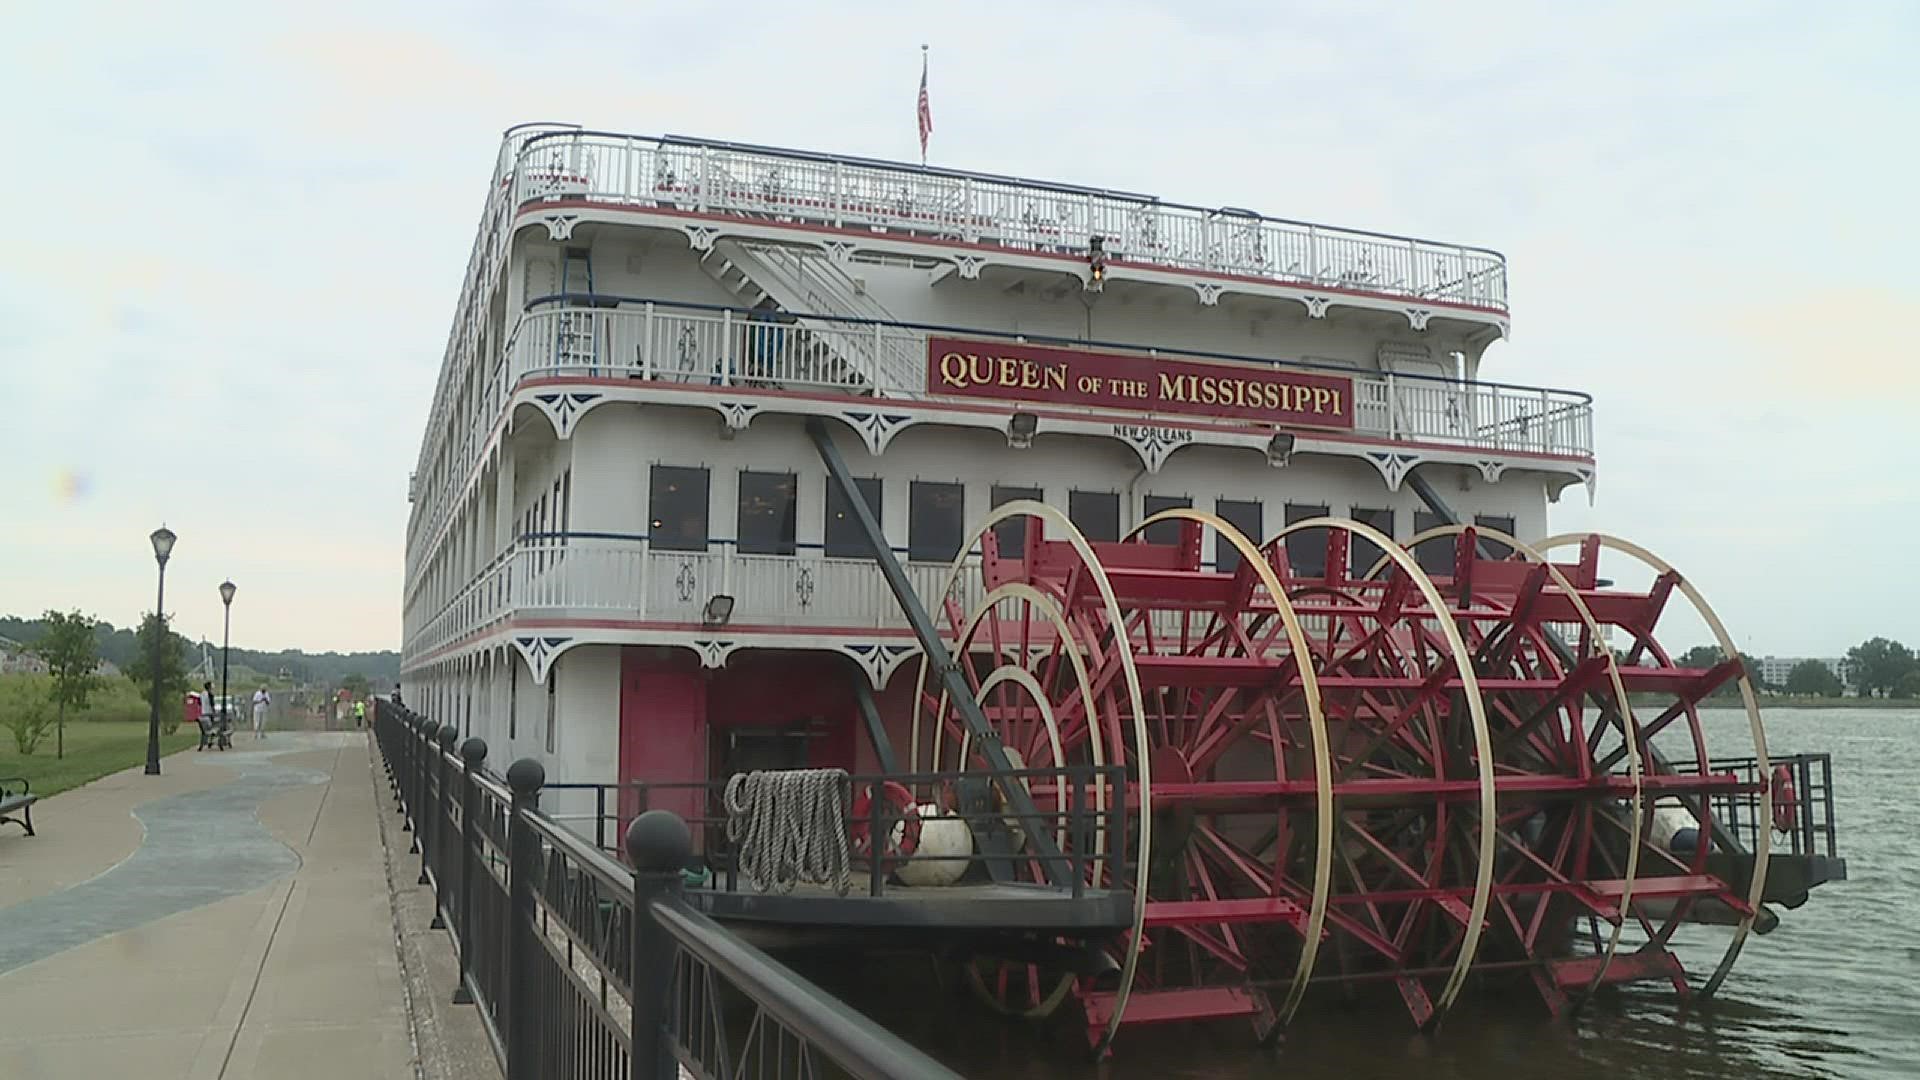 Over 100 passengers on the Queen of the Mississippi spent the morning exploring the Quad Cities.